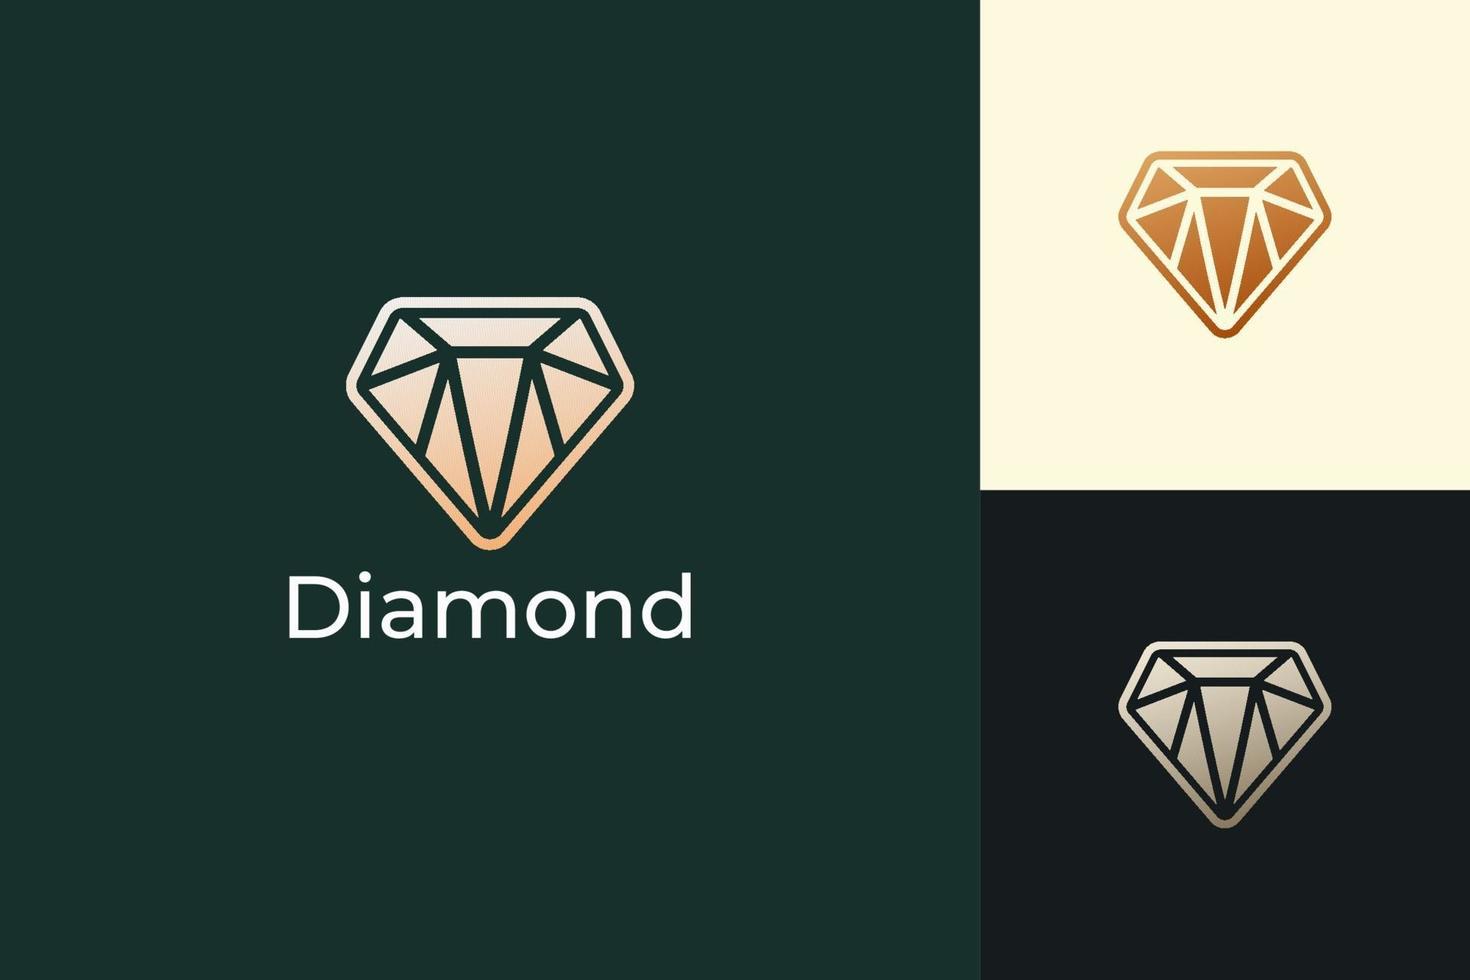 Luxury gem or jewel logo in diamond shape with gold color vector